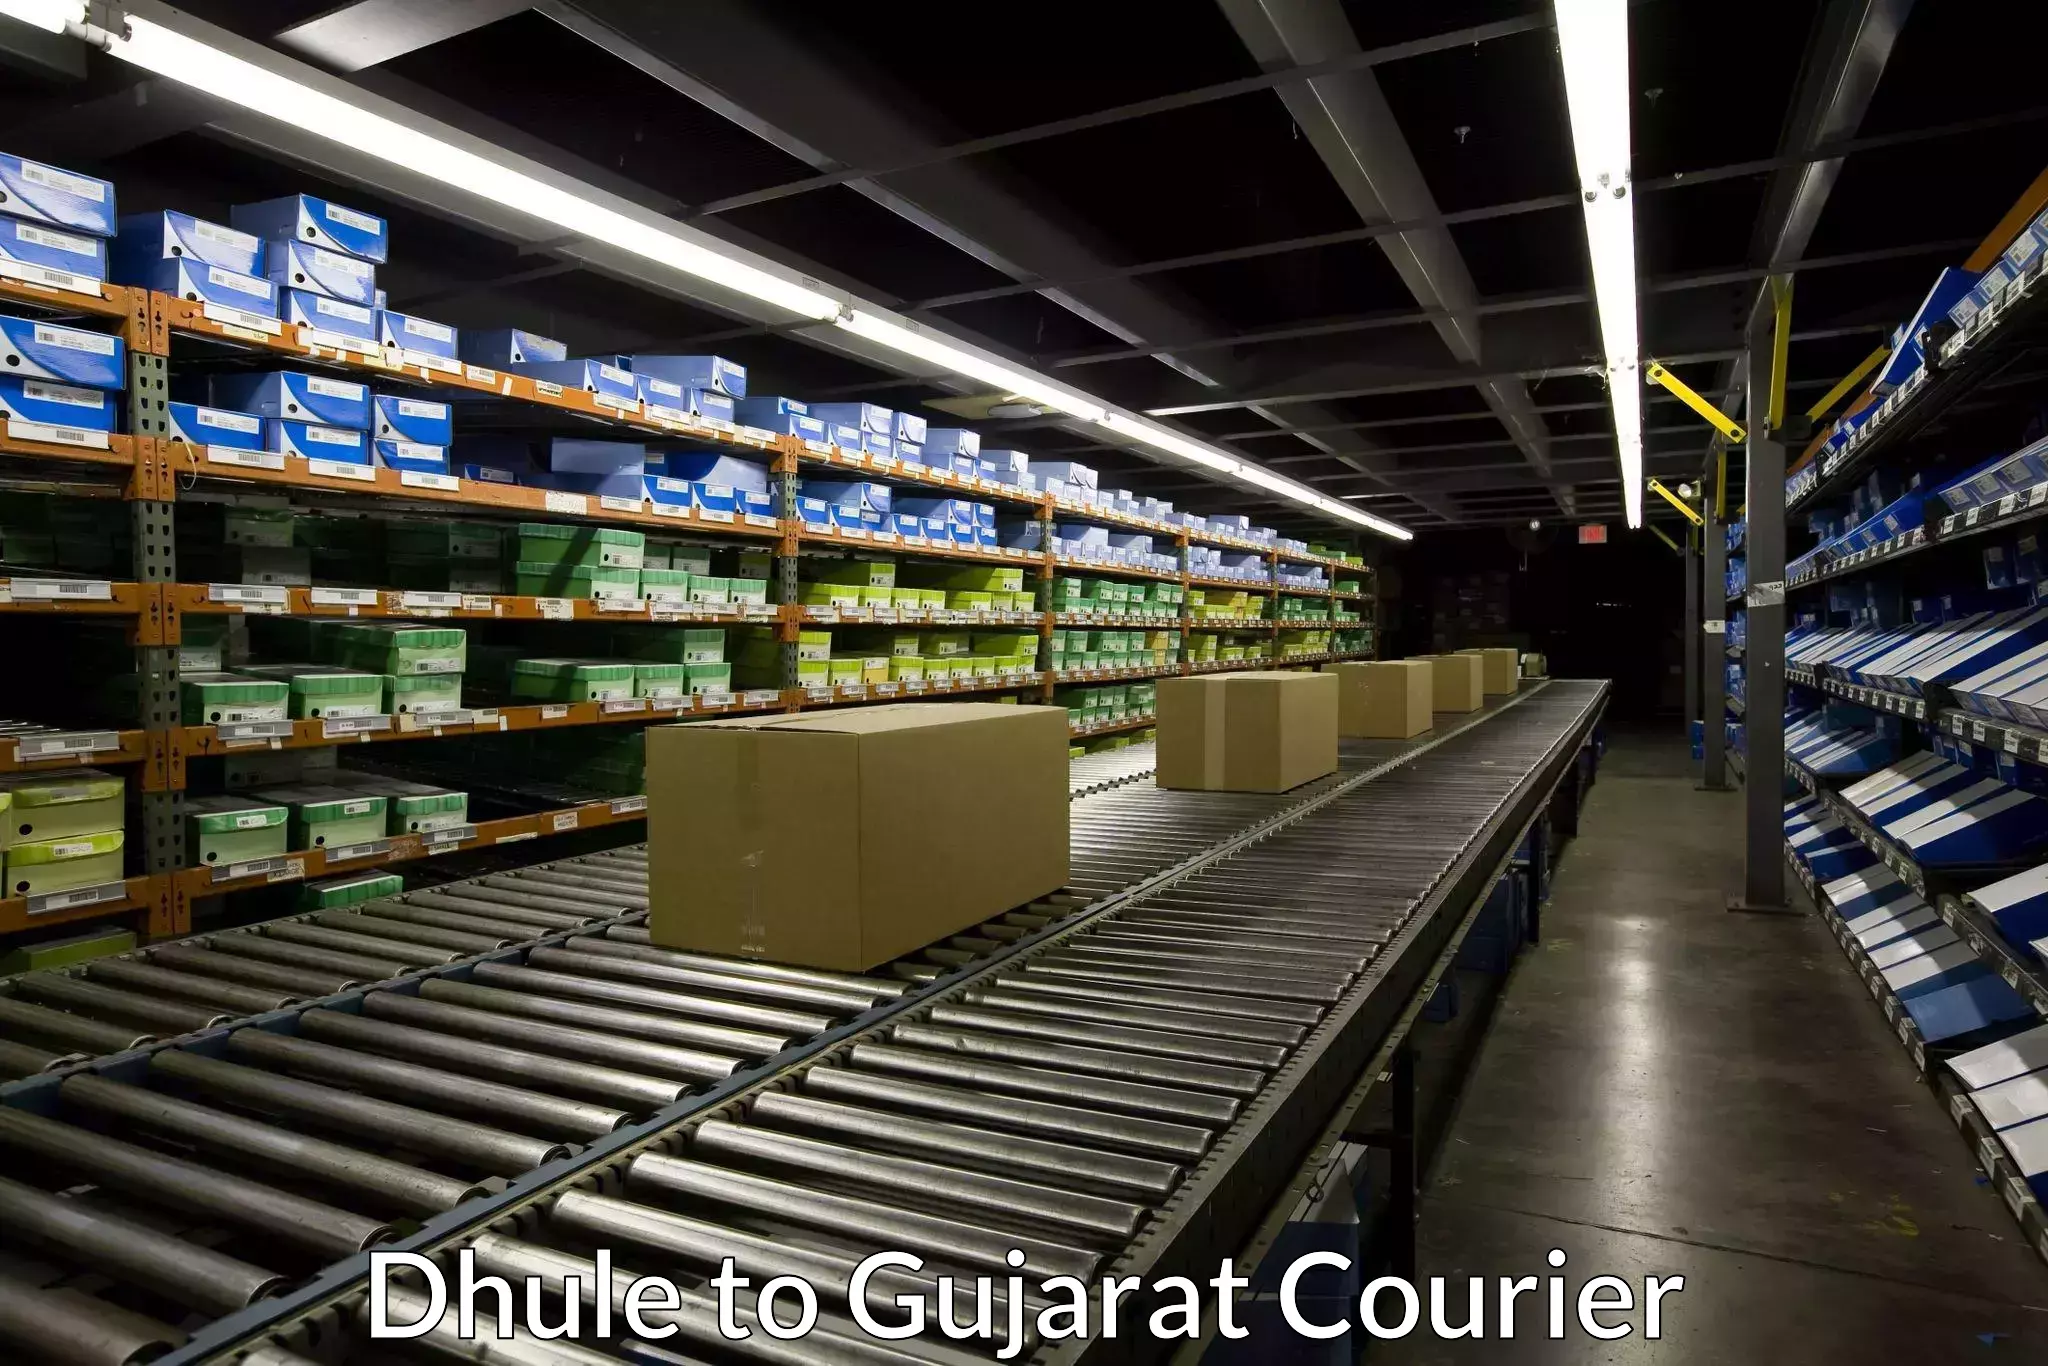 Parcel service for businesses Dhule to Gujarat